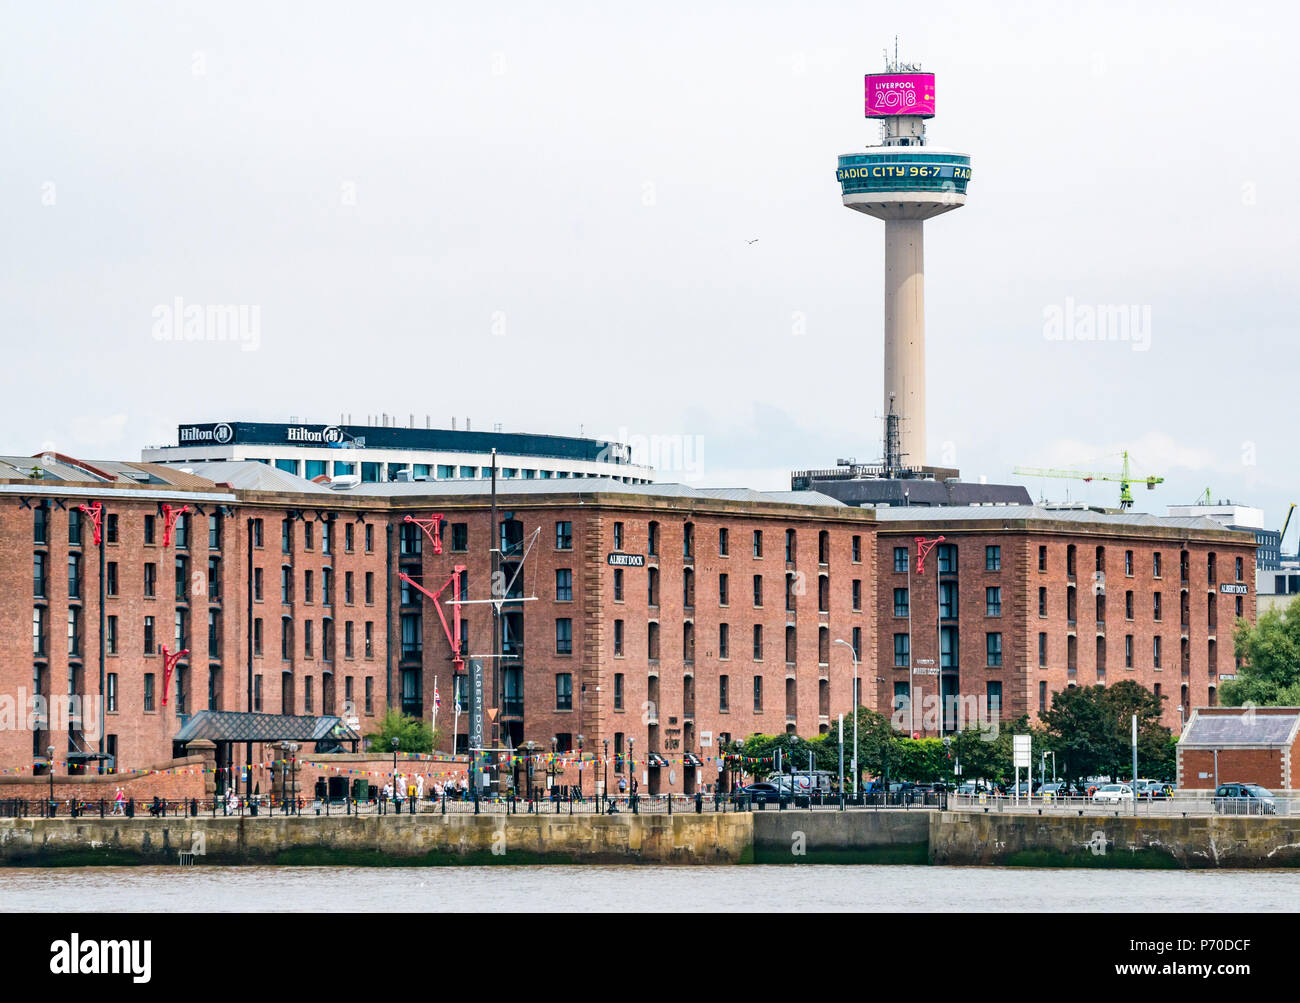 St John's Beacon Radio City observation tower and Albert Dock warehouses, converted into apartments, riverside, Liverpool, England, UK Stock Photo